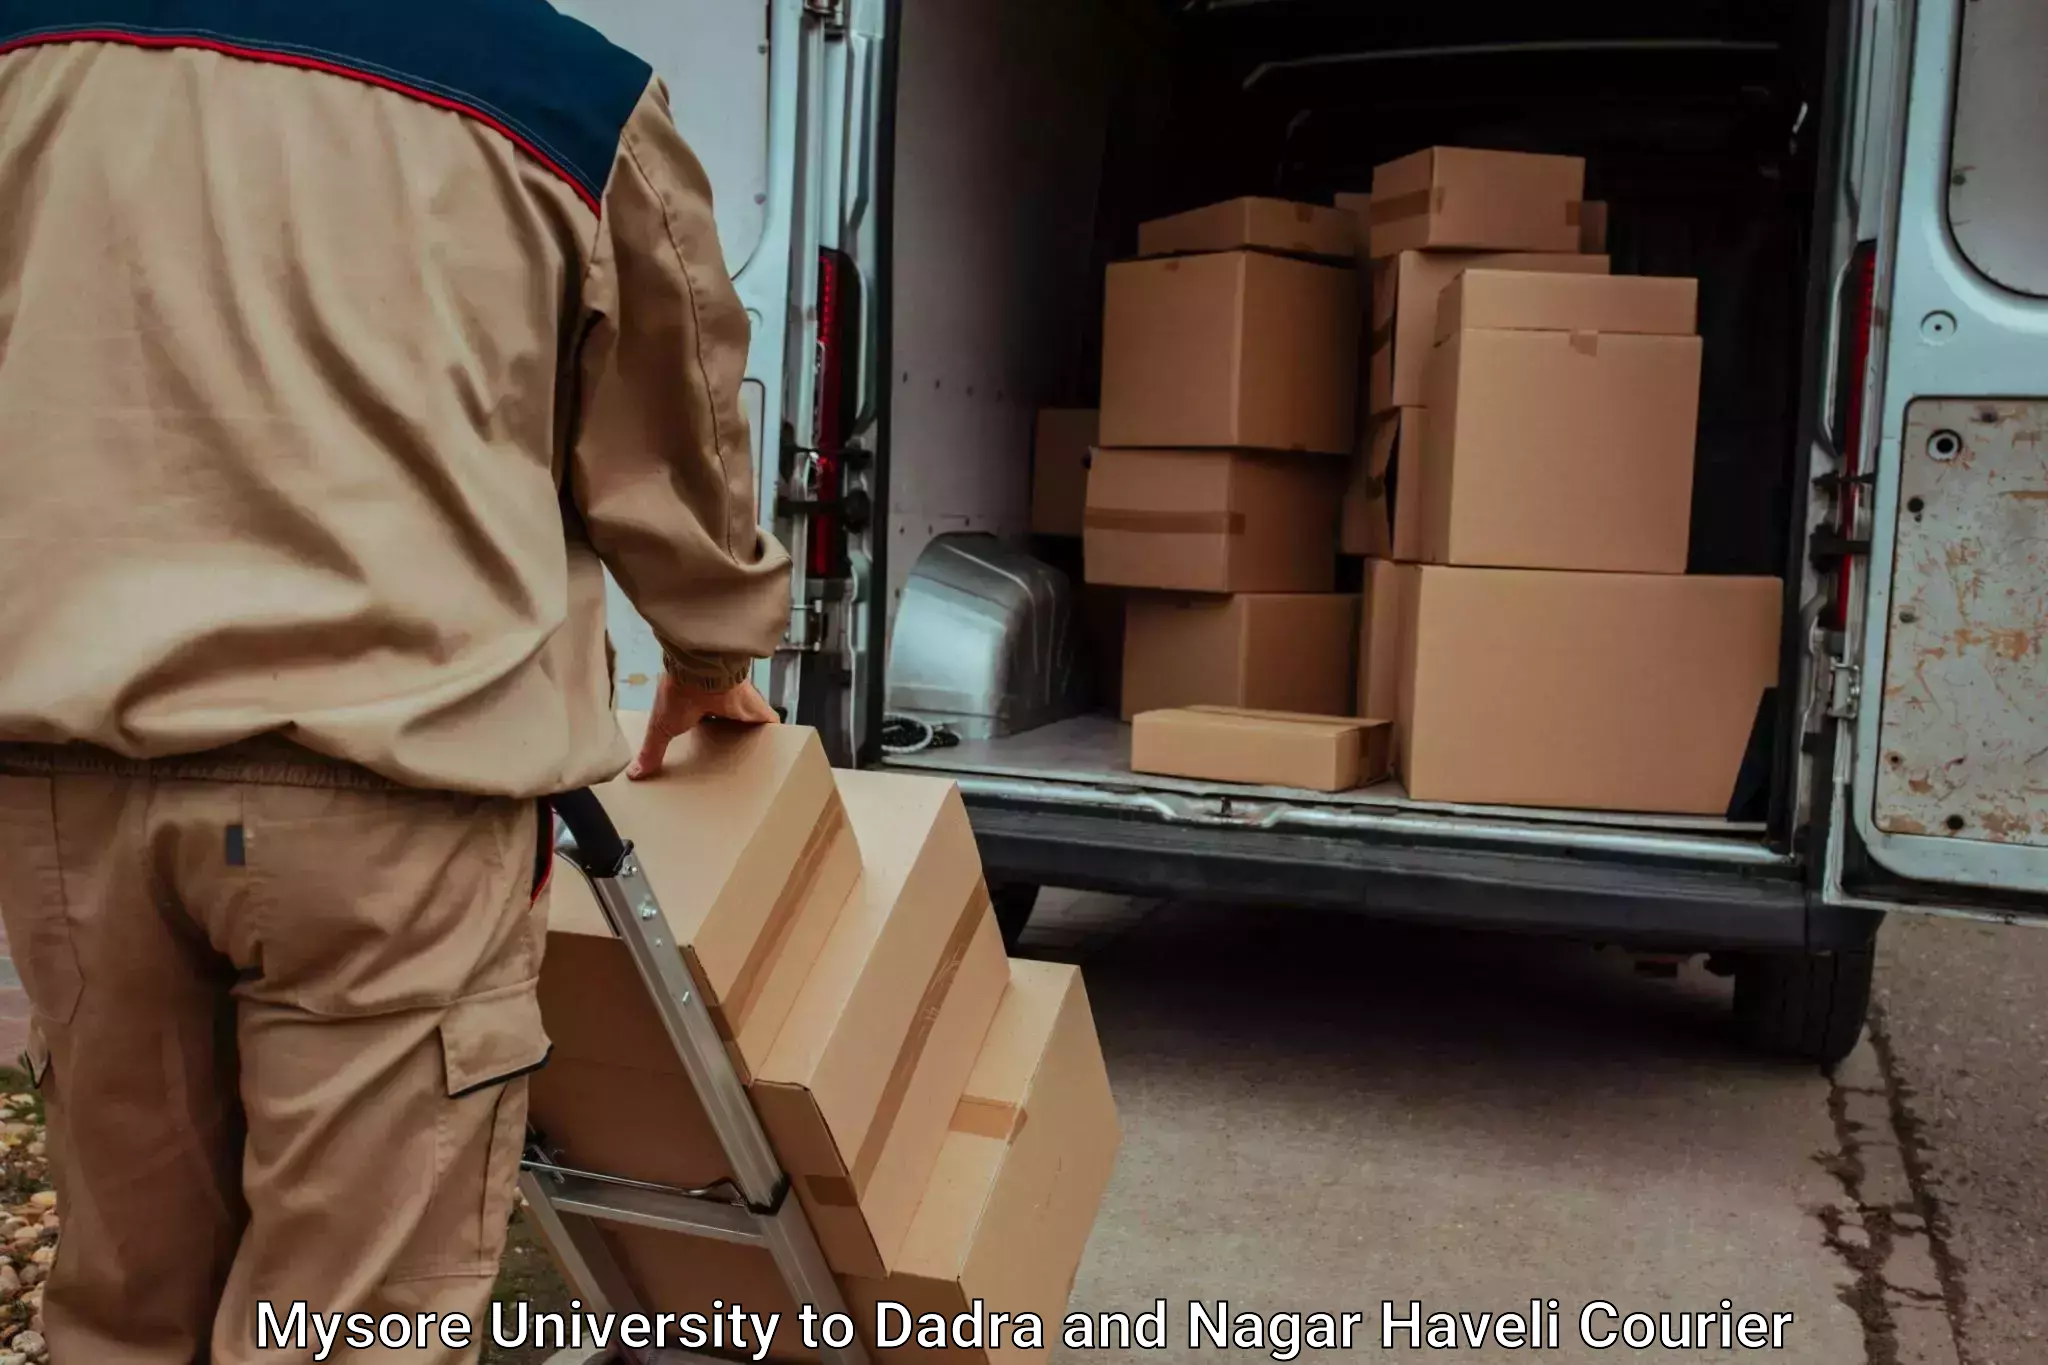 Long-distance moving services Mysore University to Dadra and Nagar Haveli